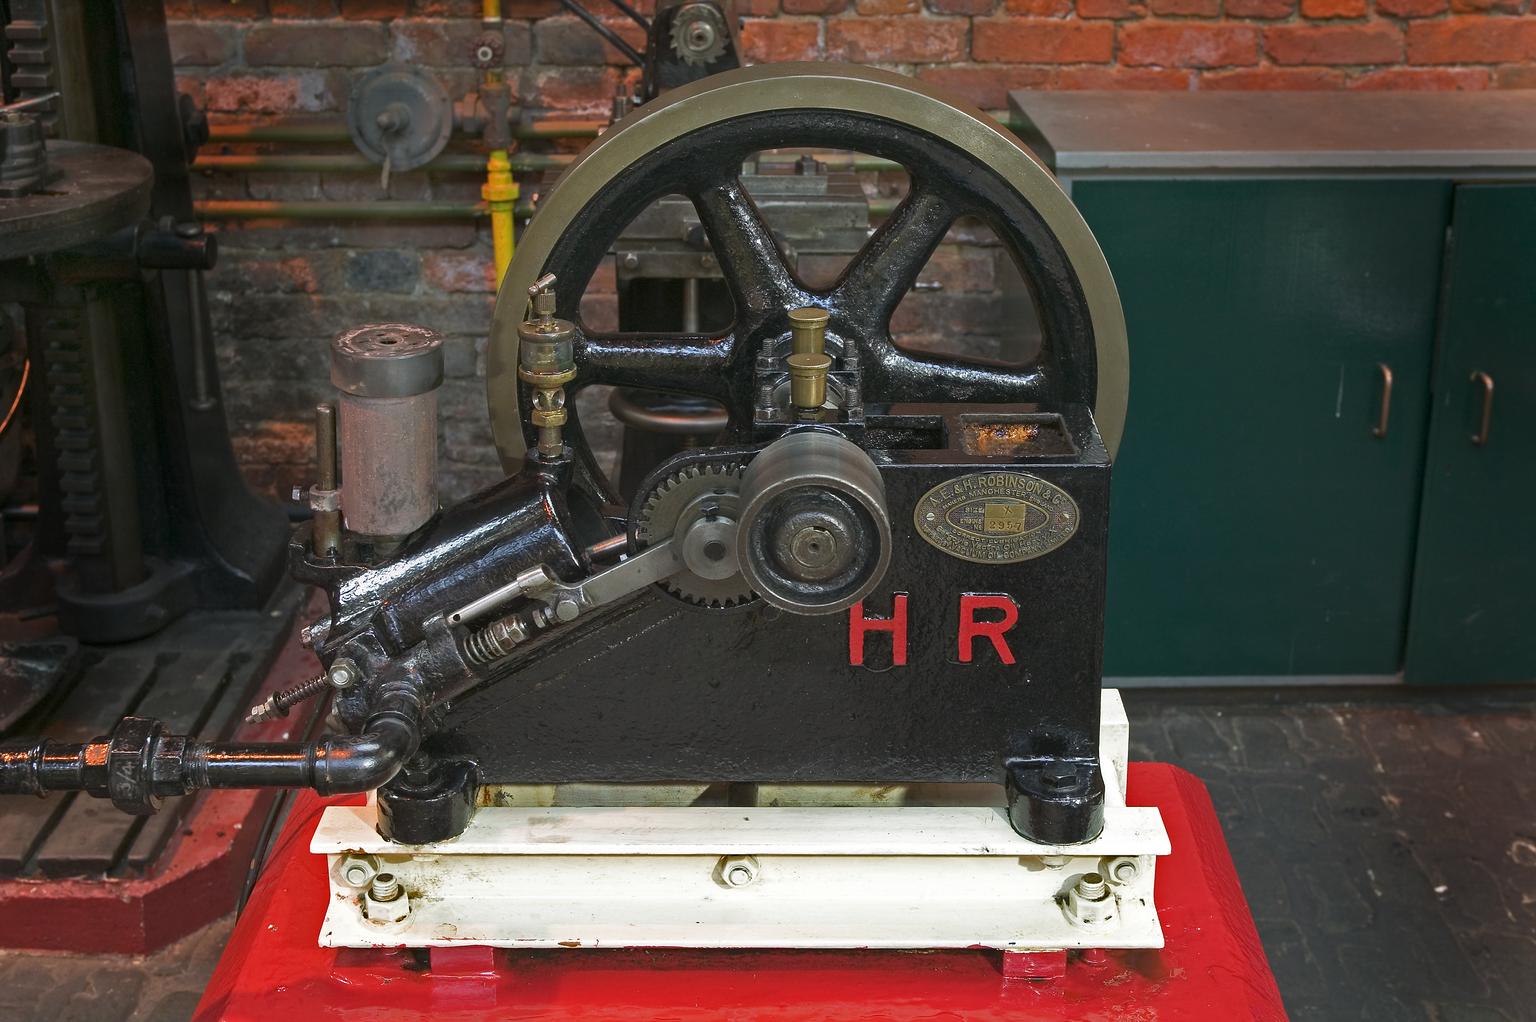 An early 20th century gas engine